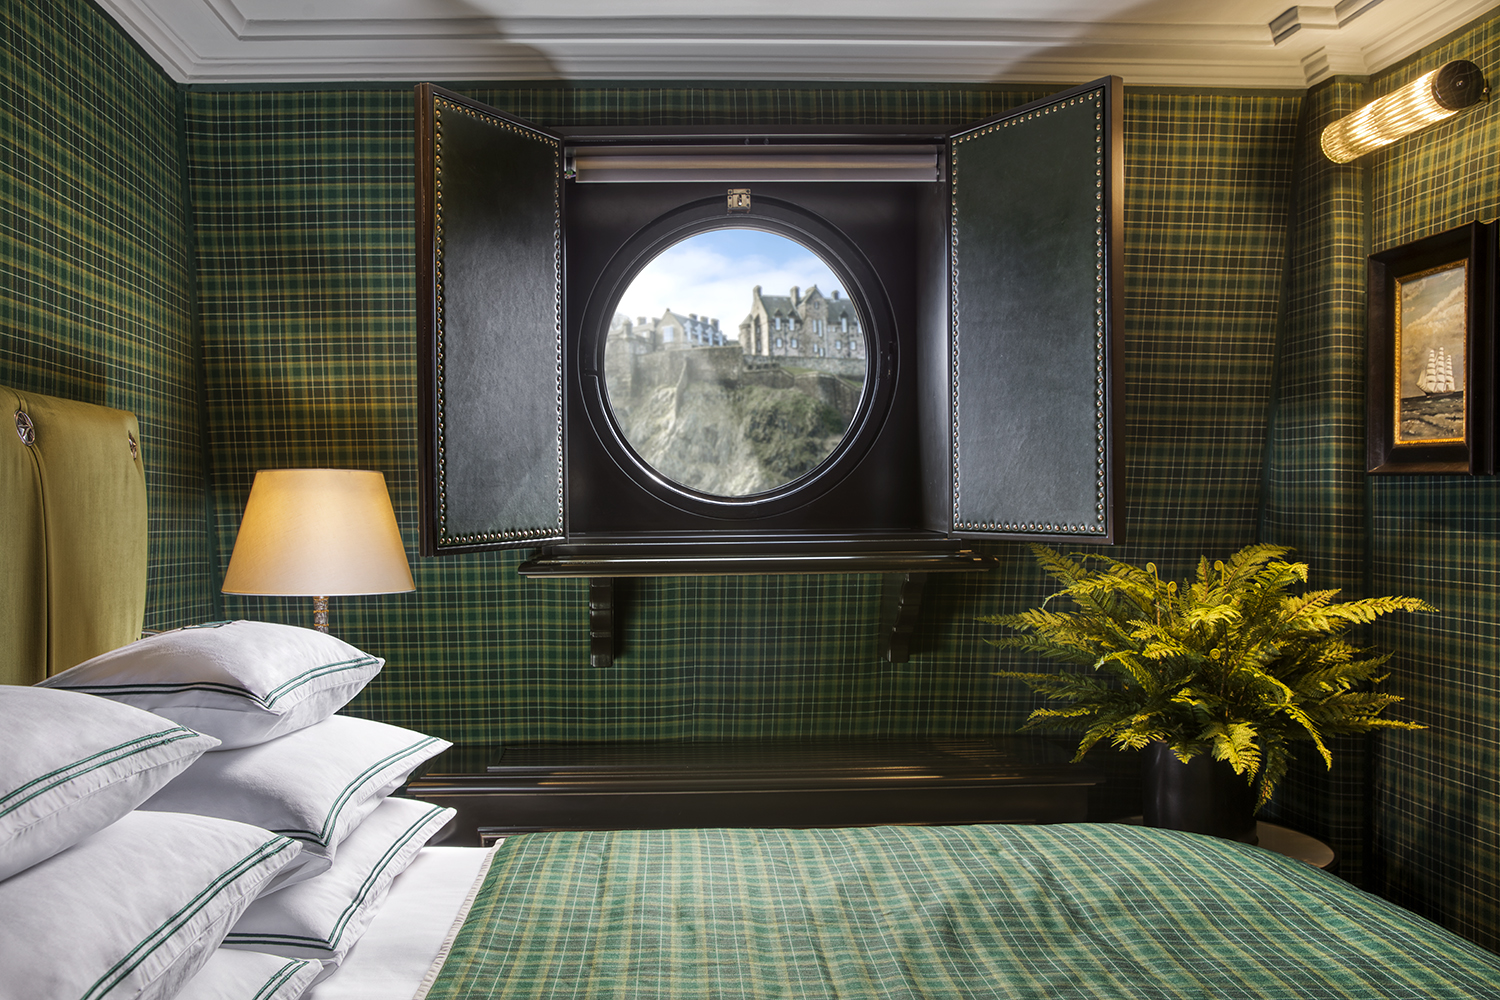 Windows inside the Executive Double Room at 100 Princes offer views of Edinburgh's glorious castle.